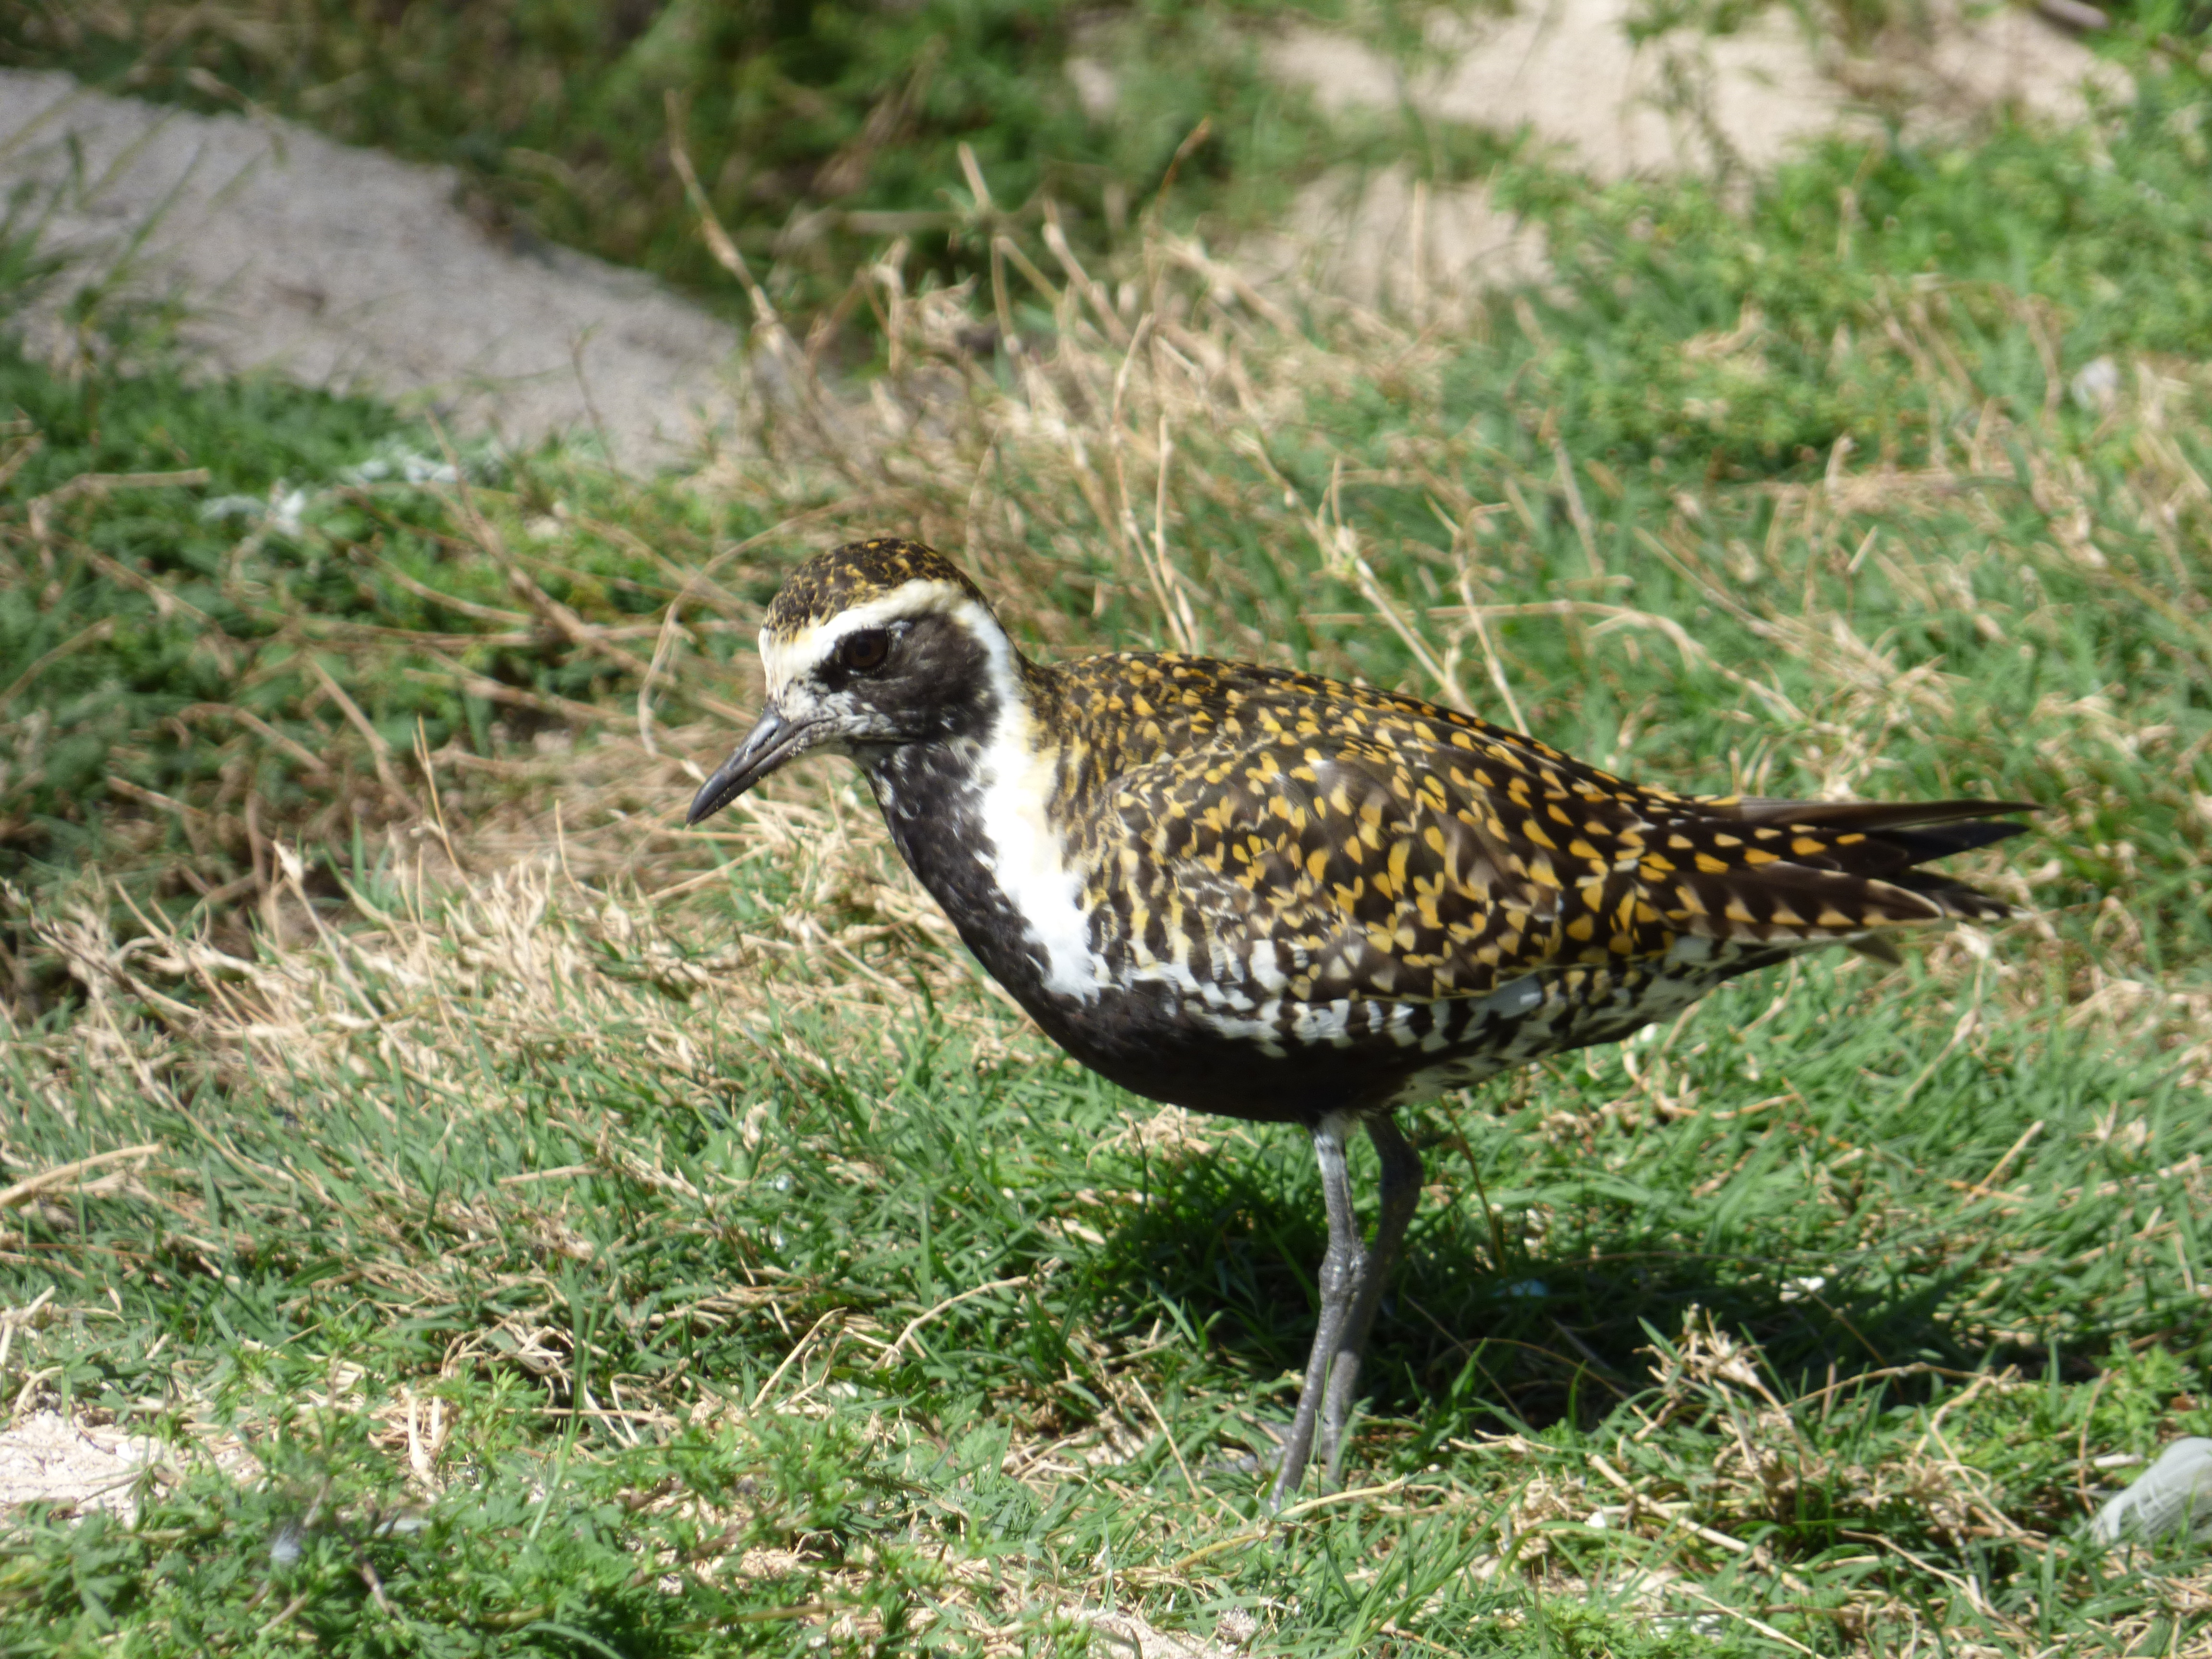 Starr-150328-0946-Cynodon dactylon-Pacific Golden Plover-Residences Sand Island-Midway Atoll (25176398031)